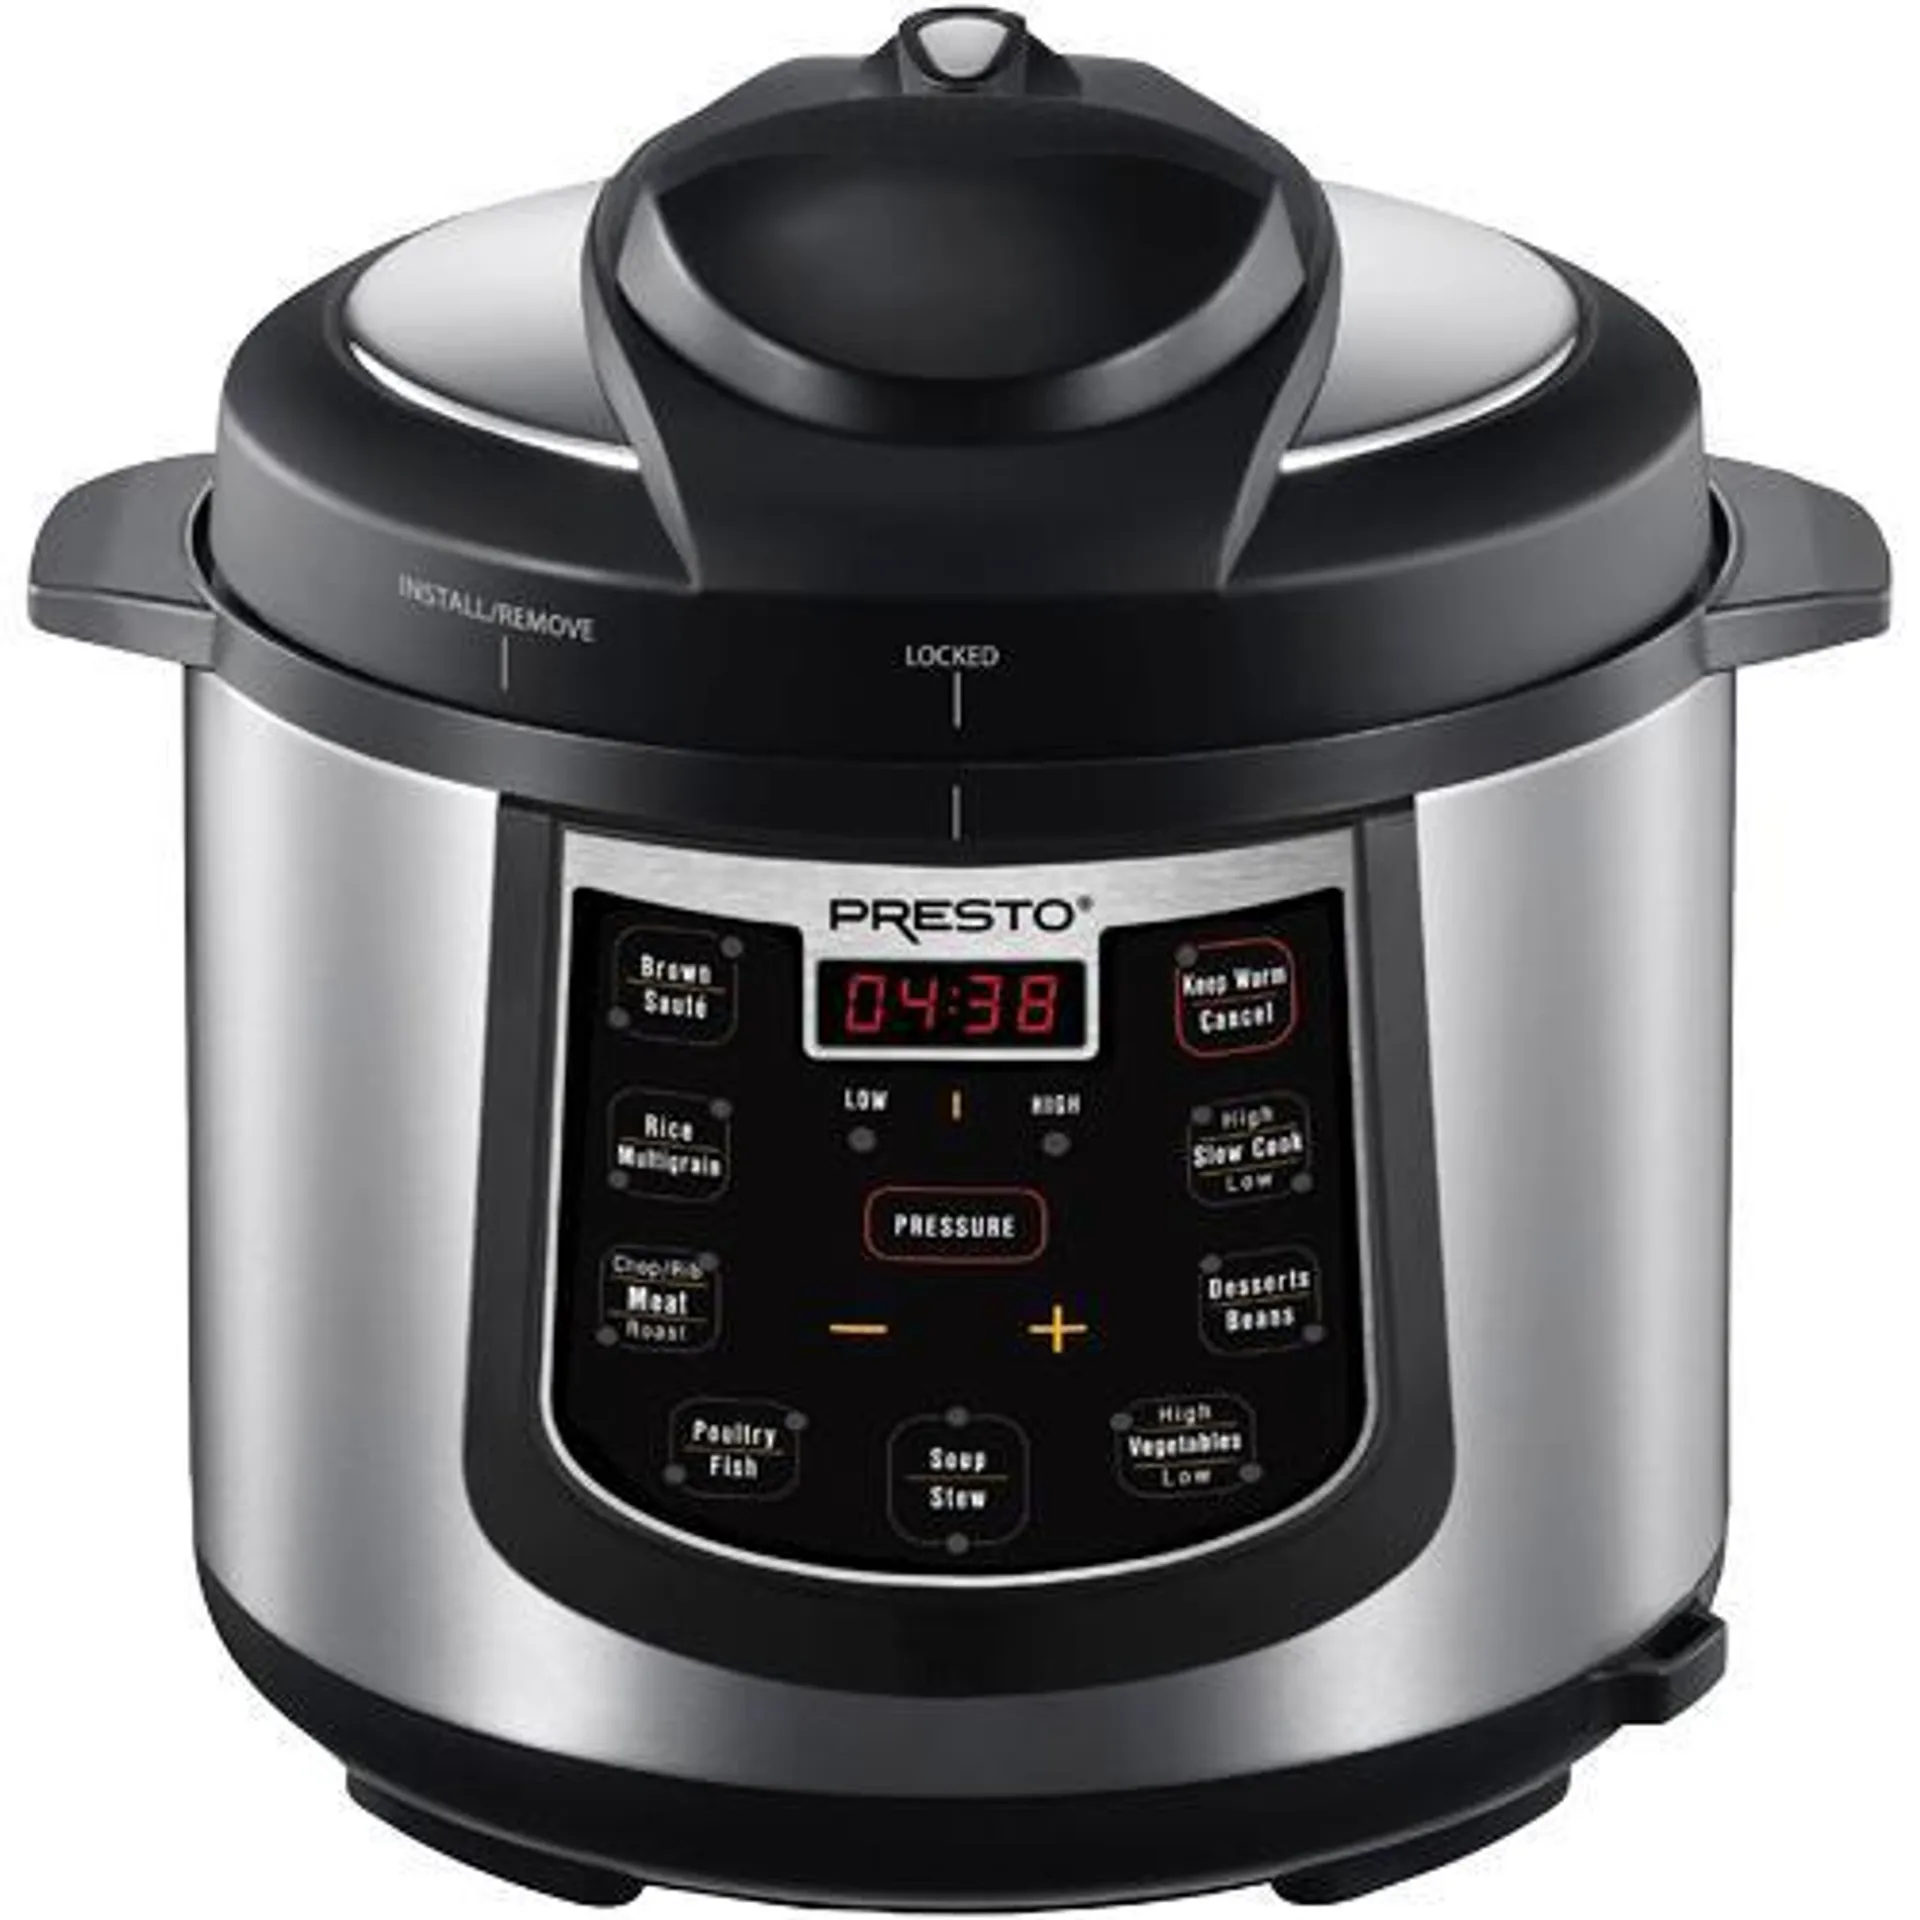 6 Quart Electric Pressure Cooker With 12 Preset Options and 19 Programmable Settings - Stainless Steel